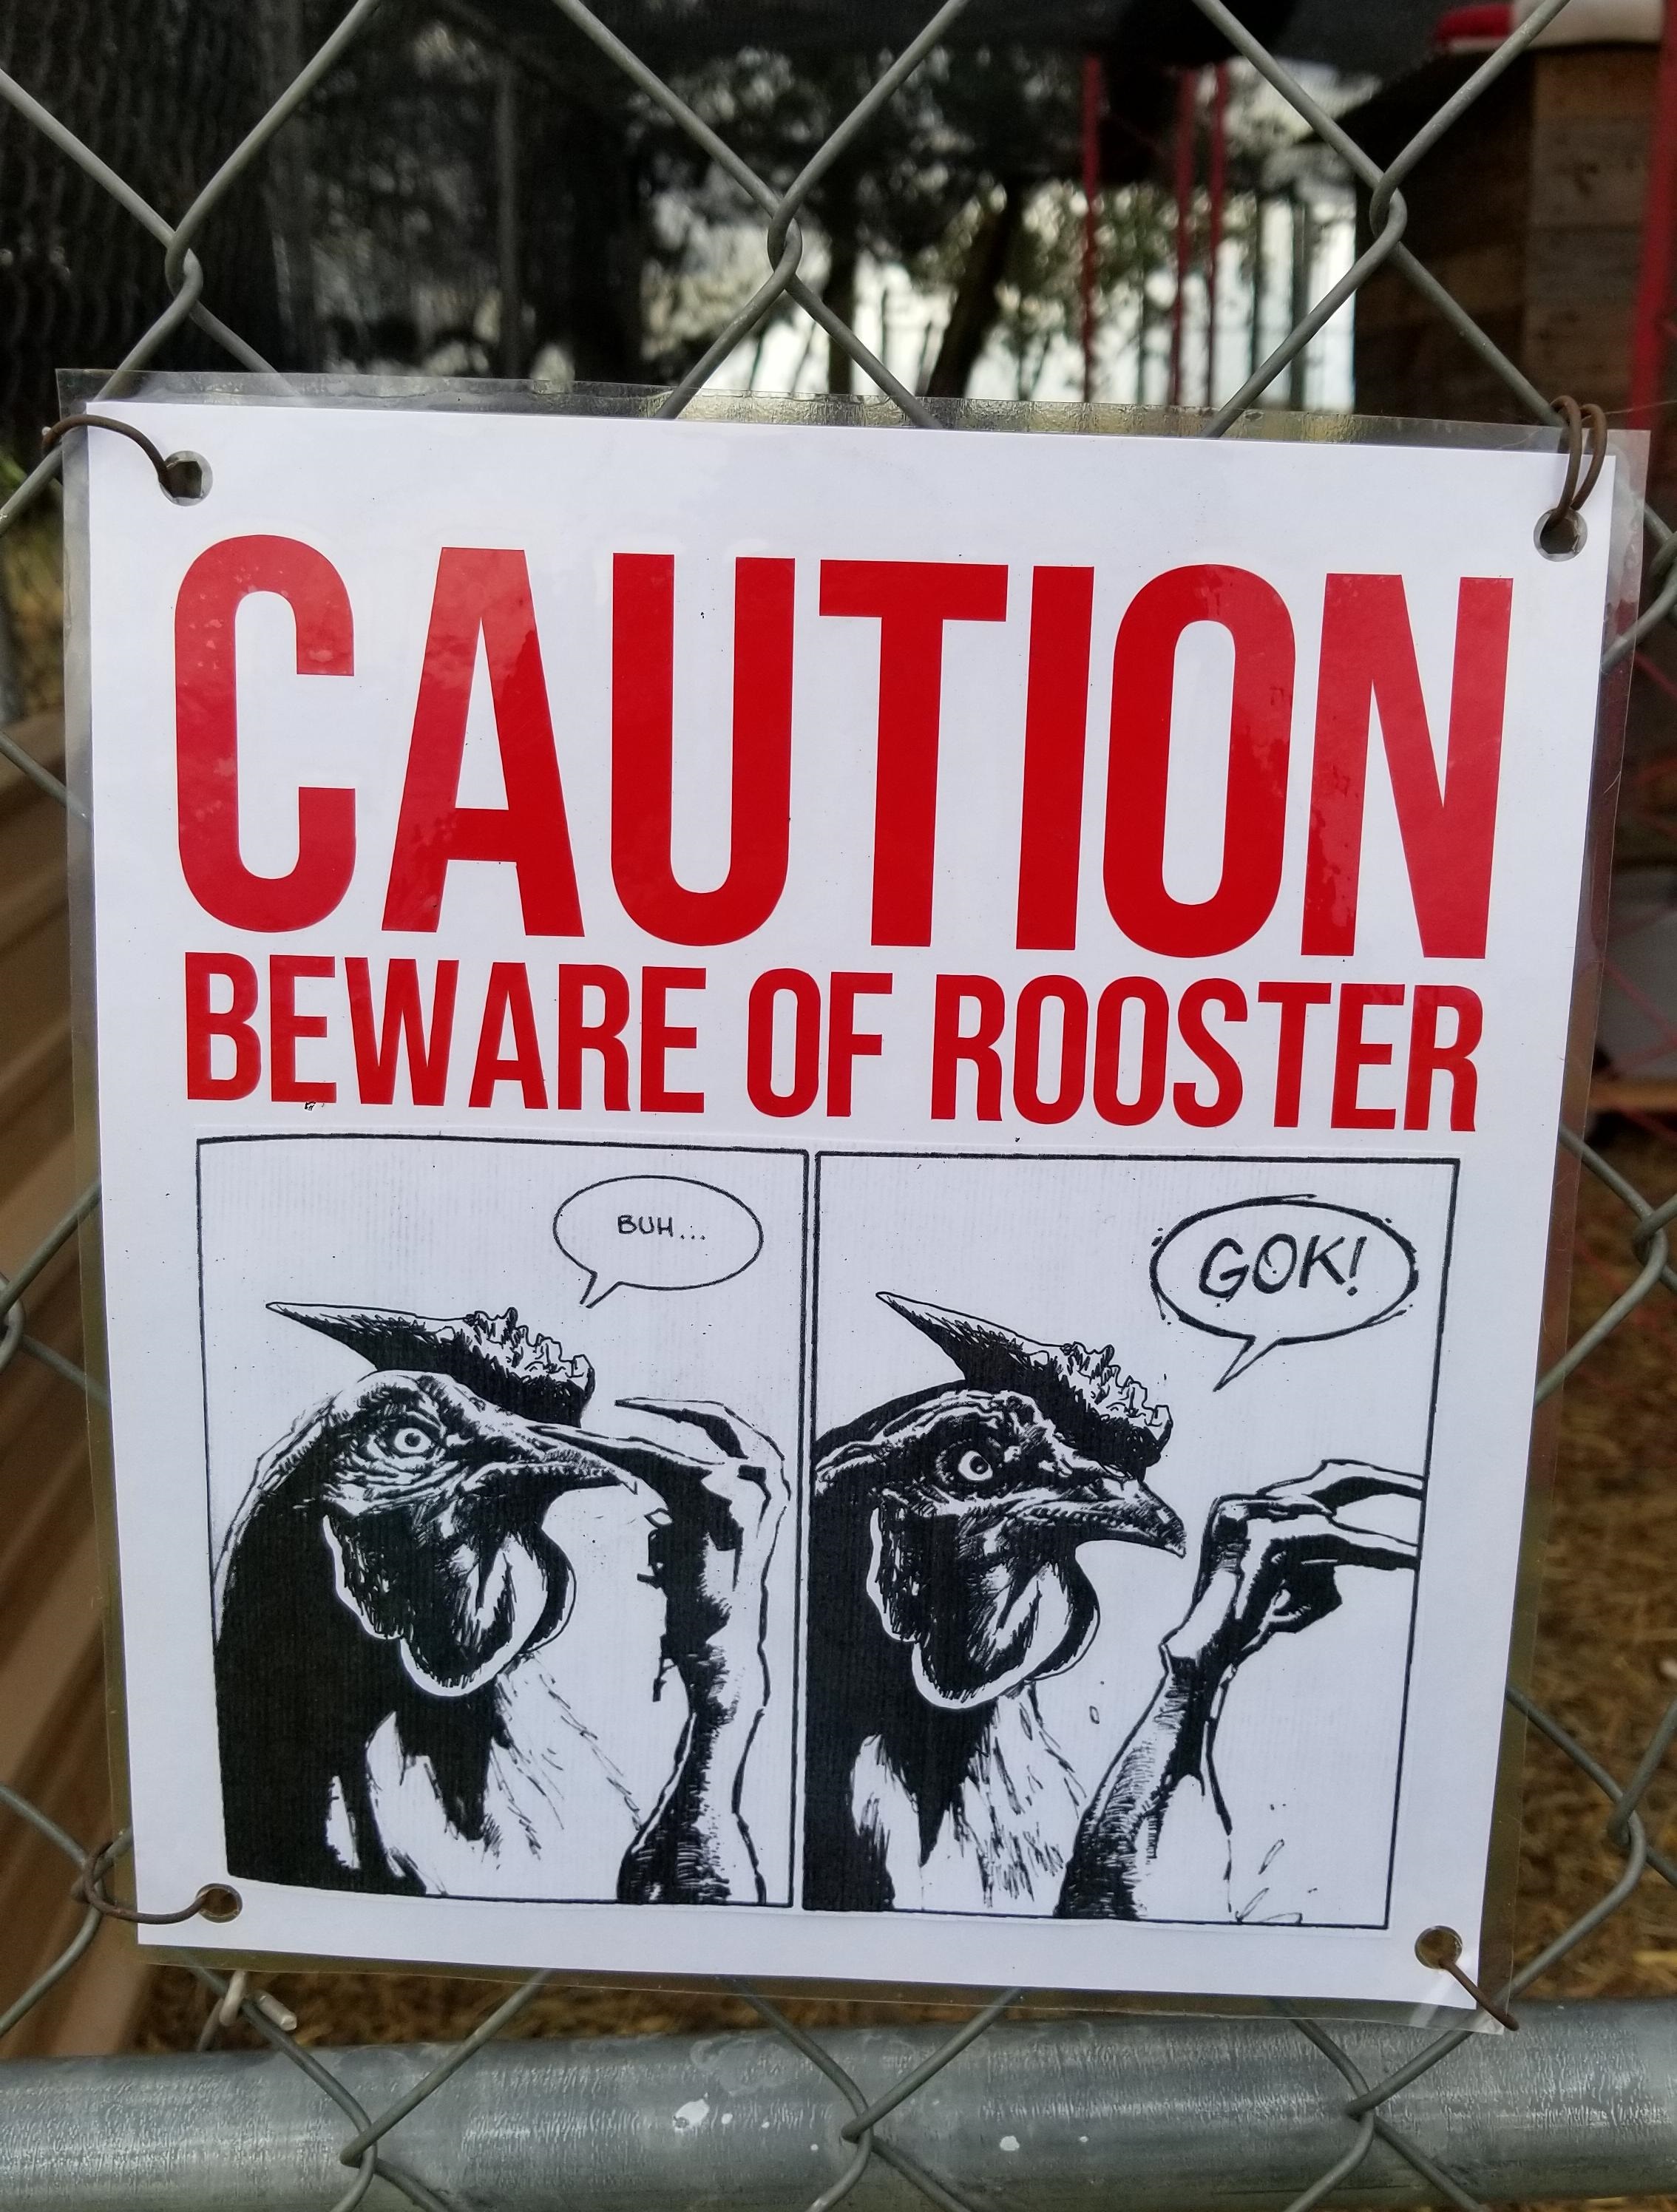 poster - Caution Beware Of Rooster Gok!